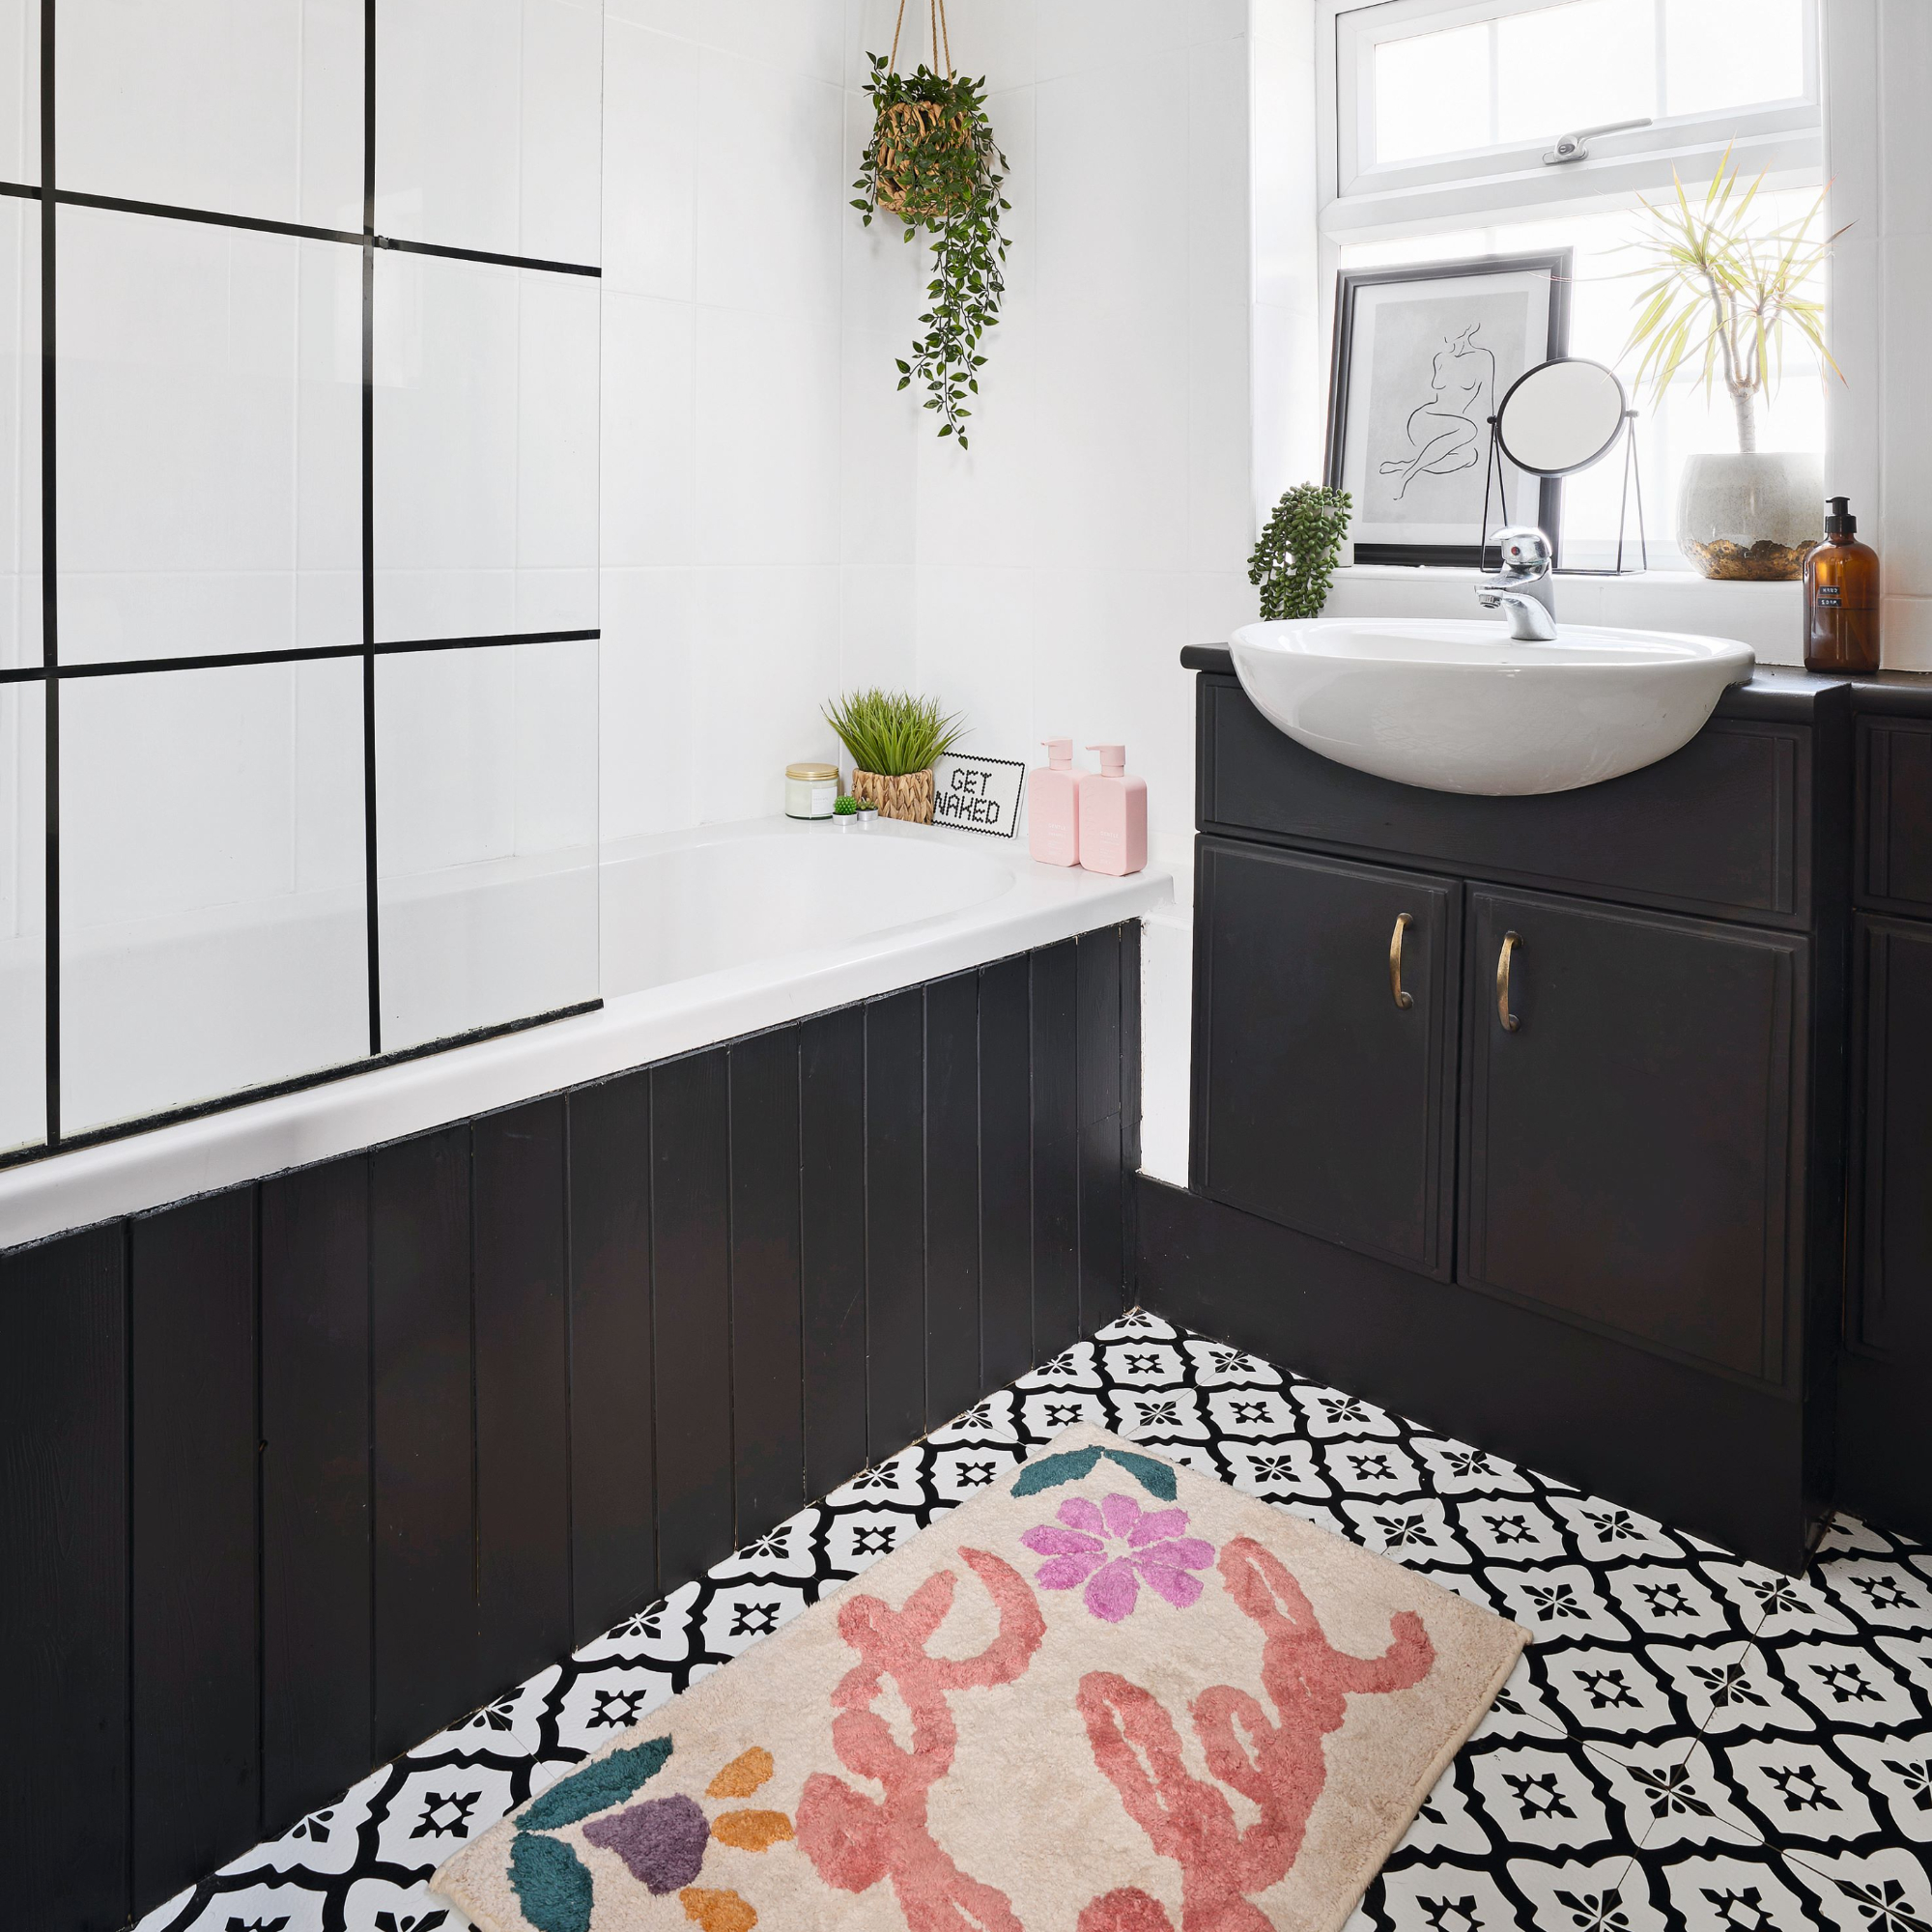 Bathroom with tiled floor and pink coloured bath mat